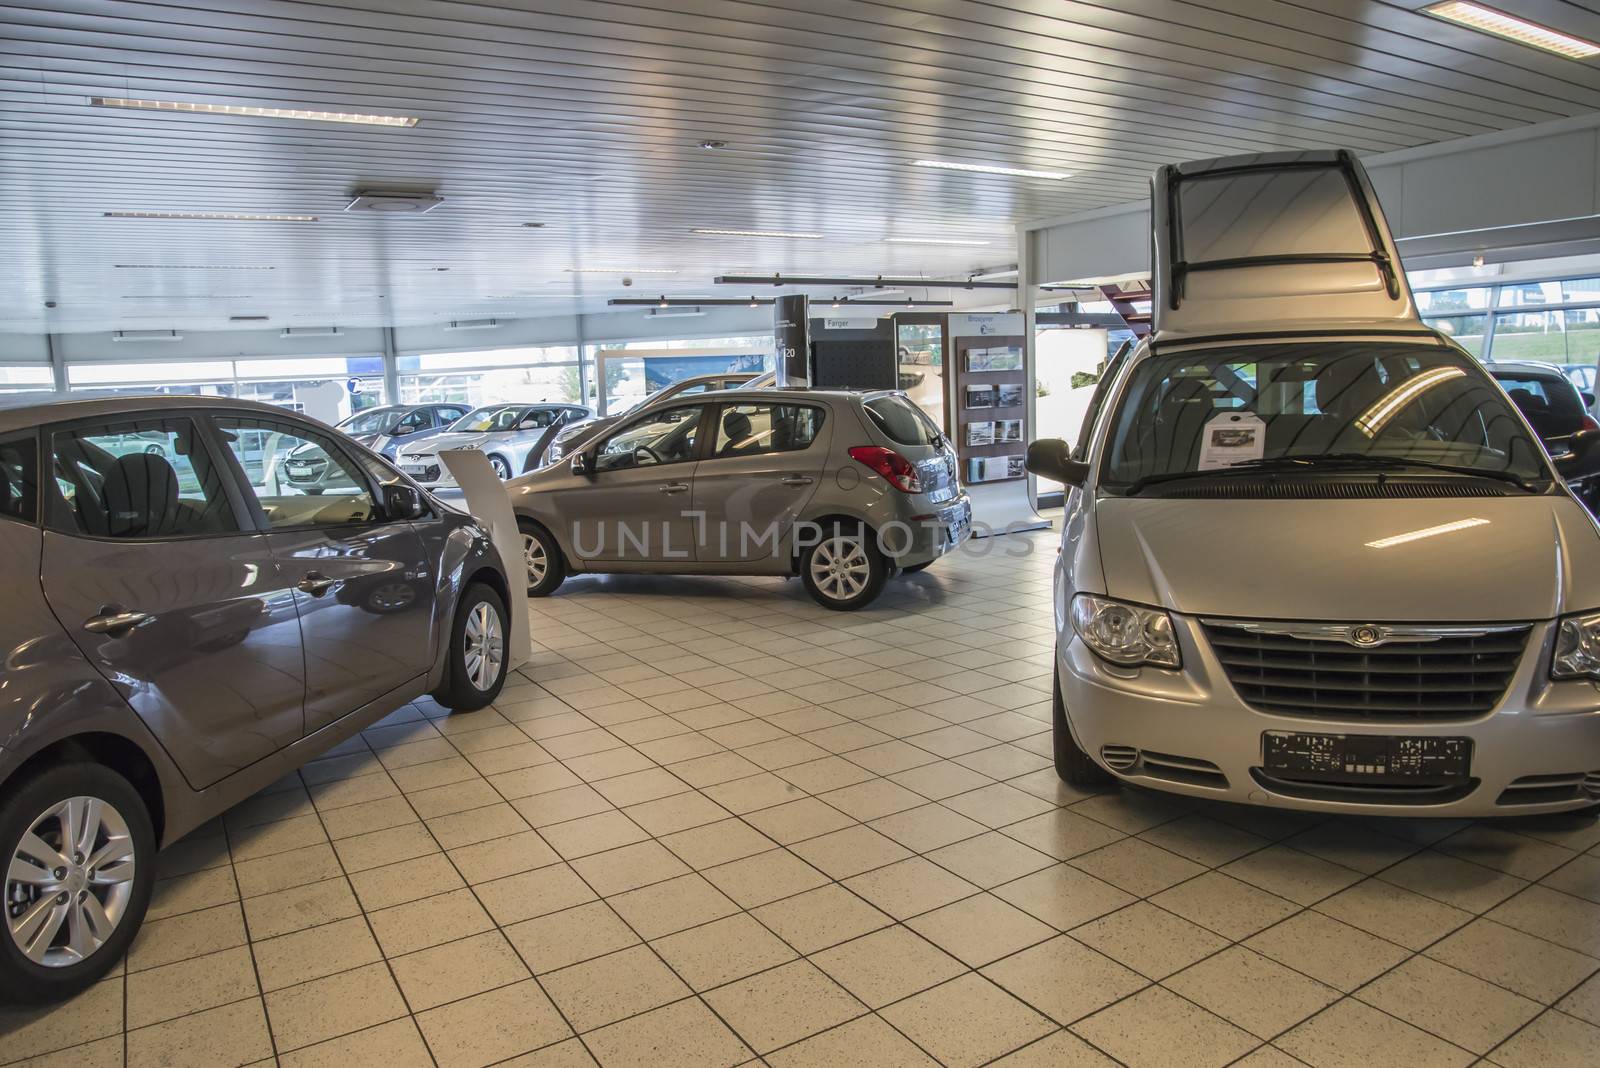 new cars in a car-dealership by steirus